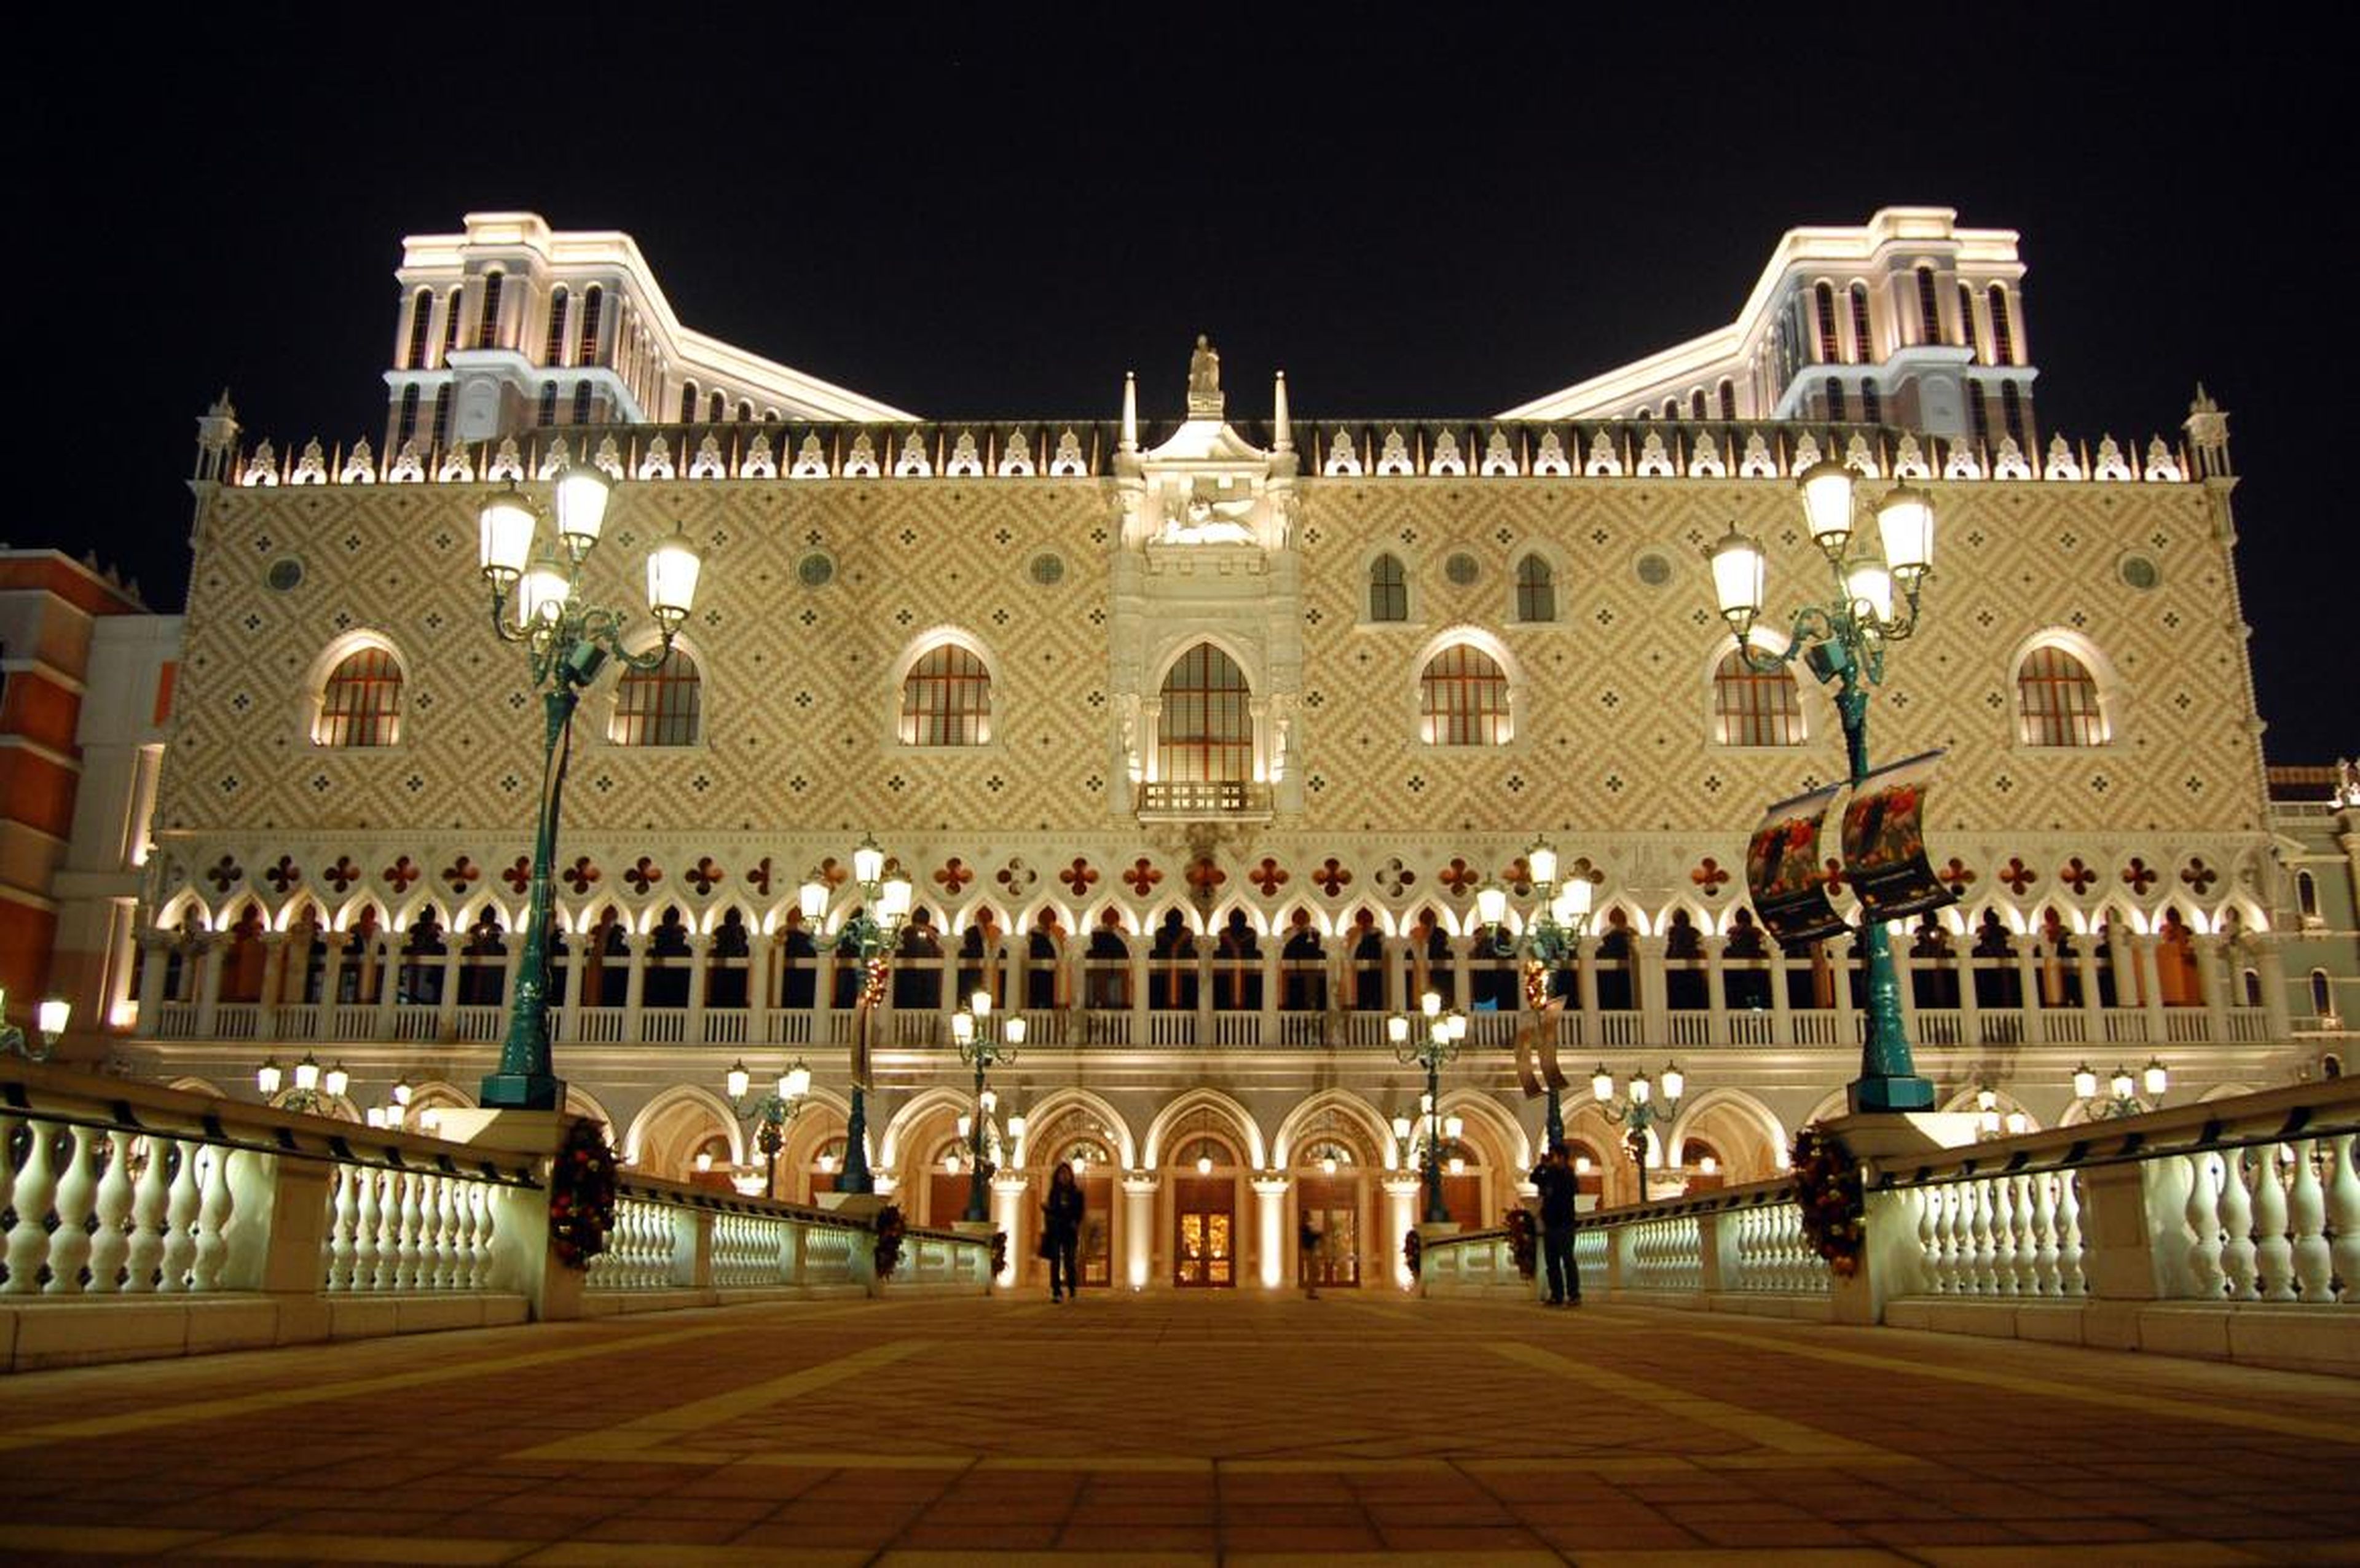 The Venetian is a luxury hotel, mall, and casino in Macau. Built in 2005, the 738-foot resort cost $2.4 billion.